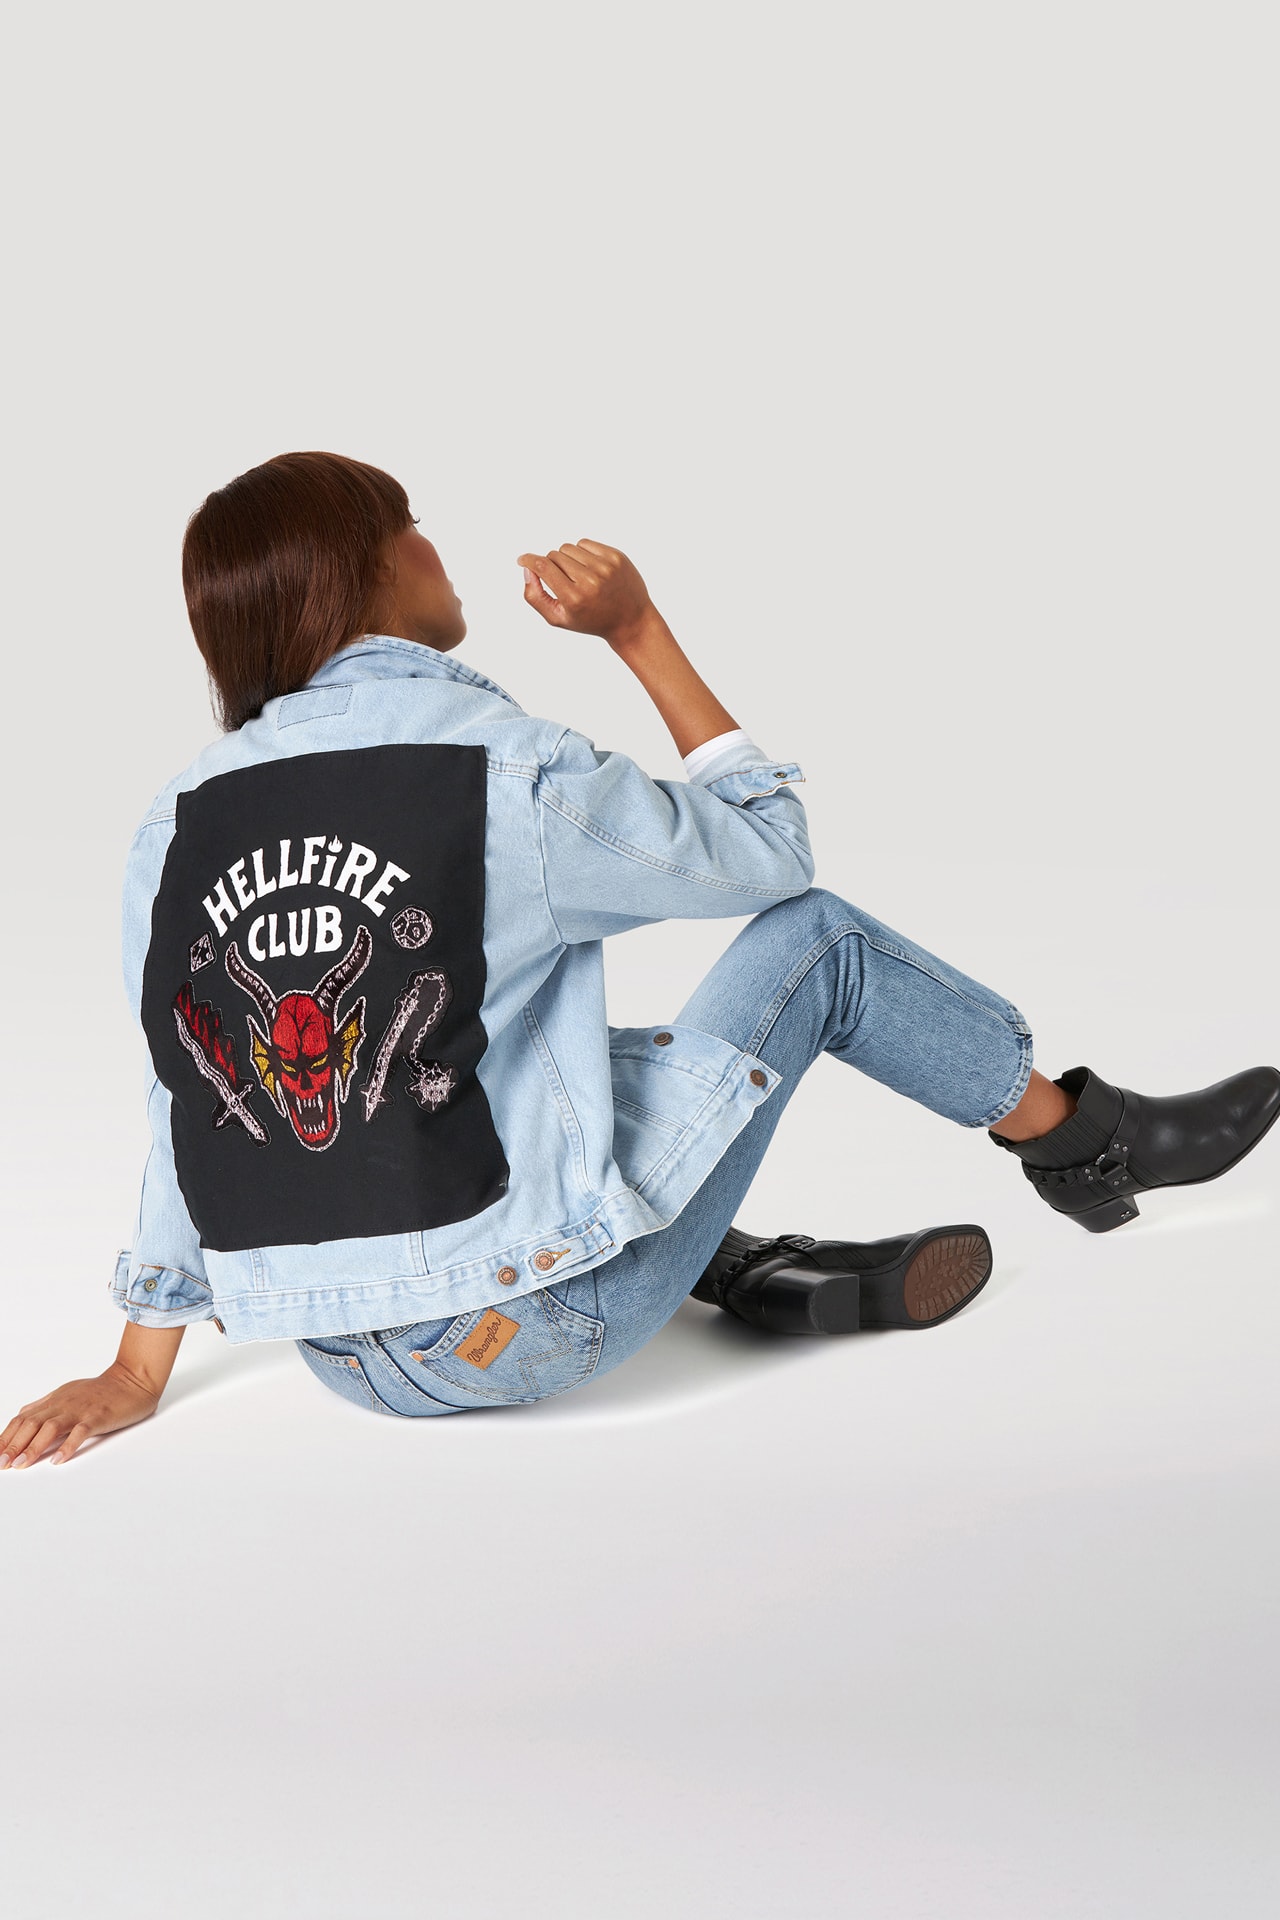 Collection launch Hellfire club inspired 80s 18th century Britain and Ireland historical crew a men’s t-shirt, women’s t-shirt & gender neutral denim jacket